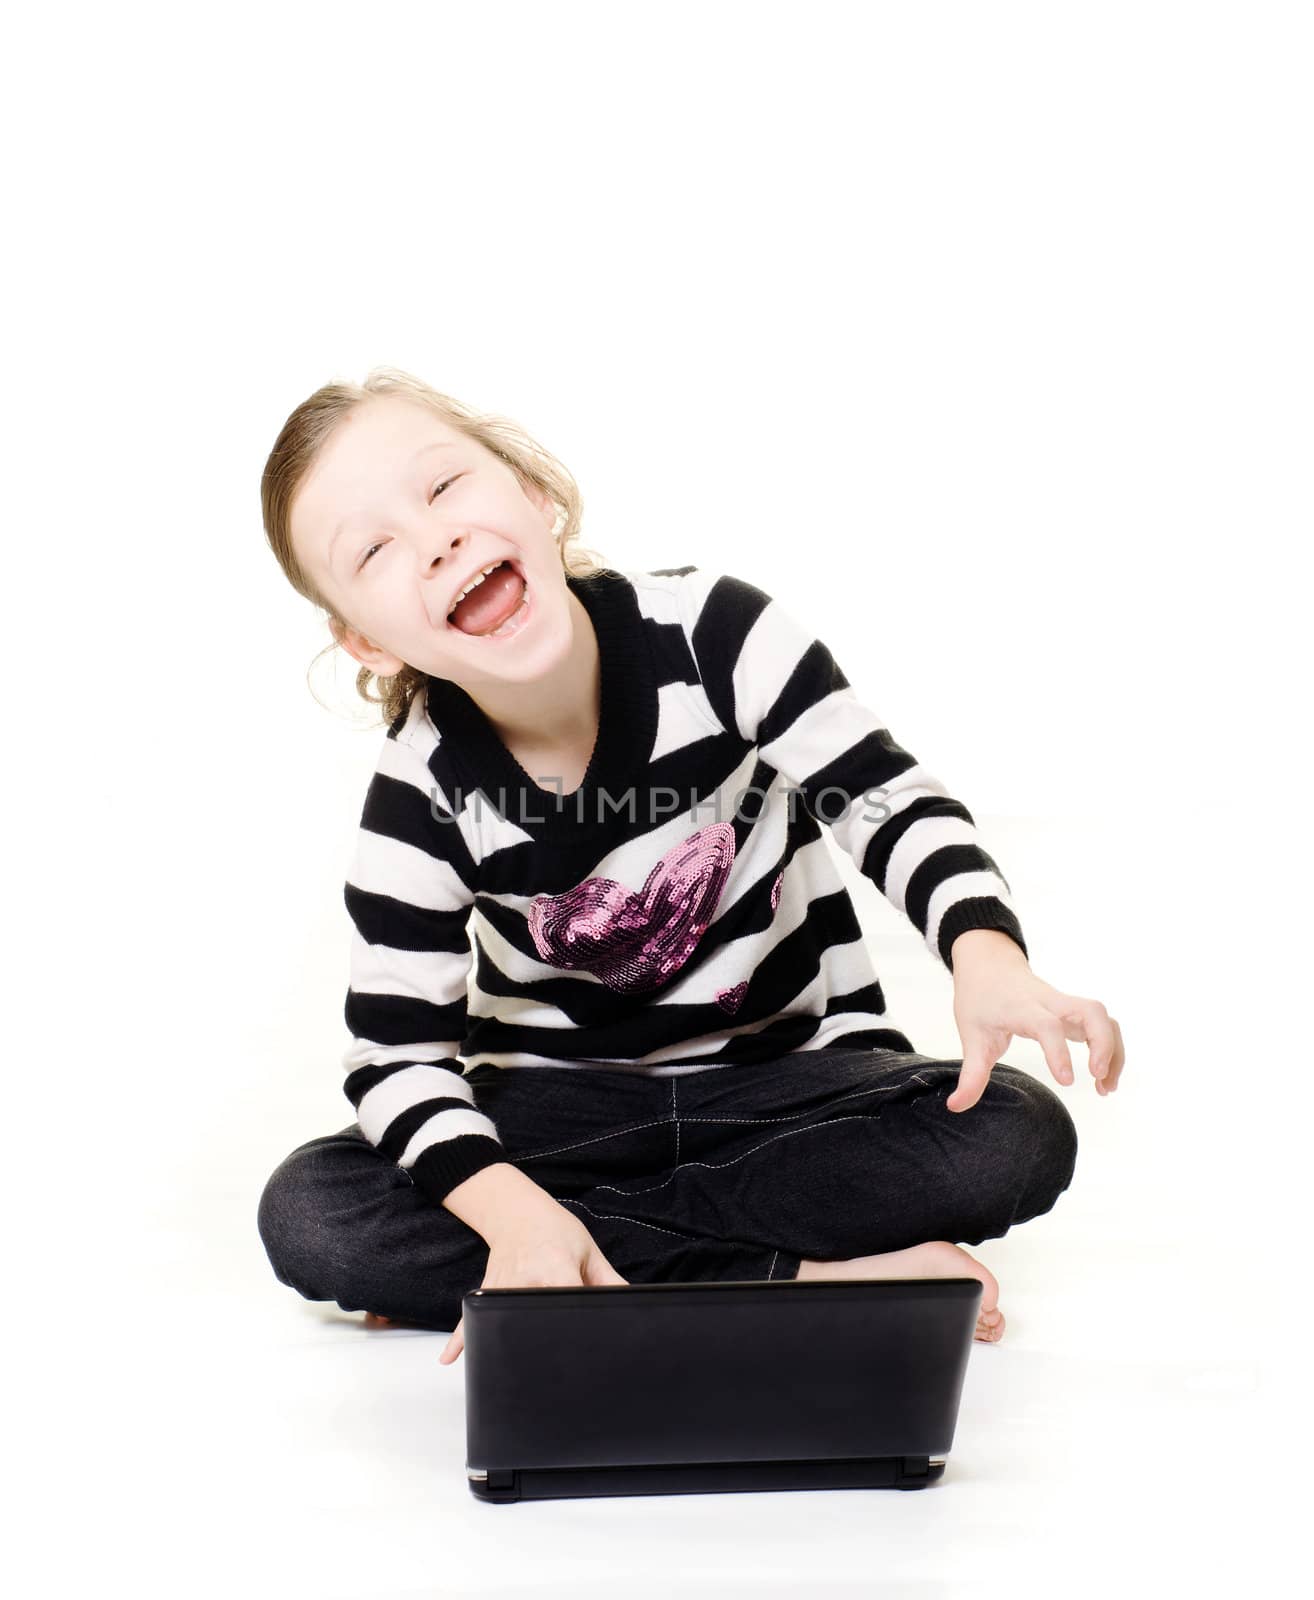 young girl happily using a computer laughing isolated on white